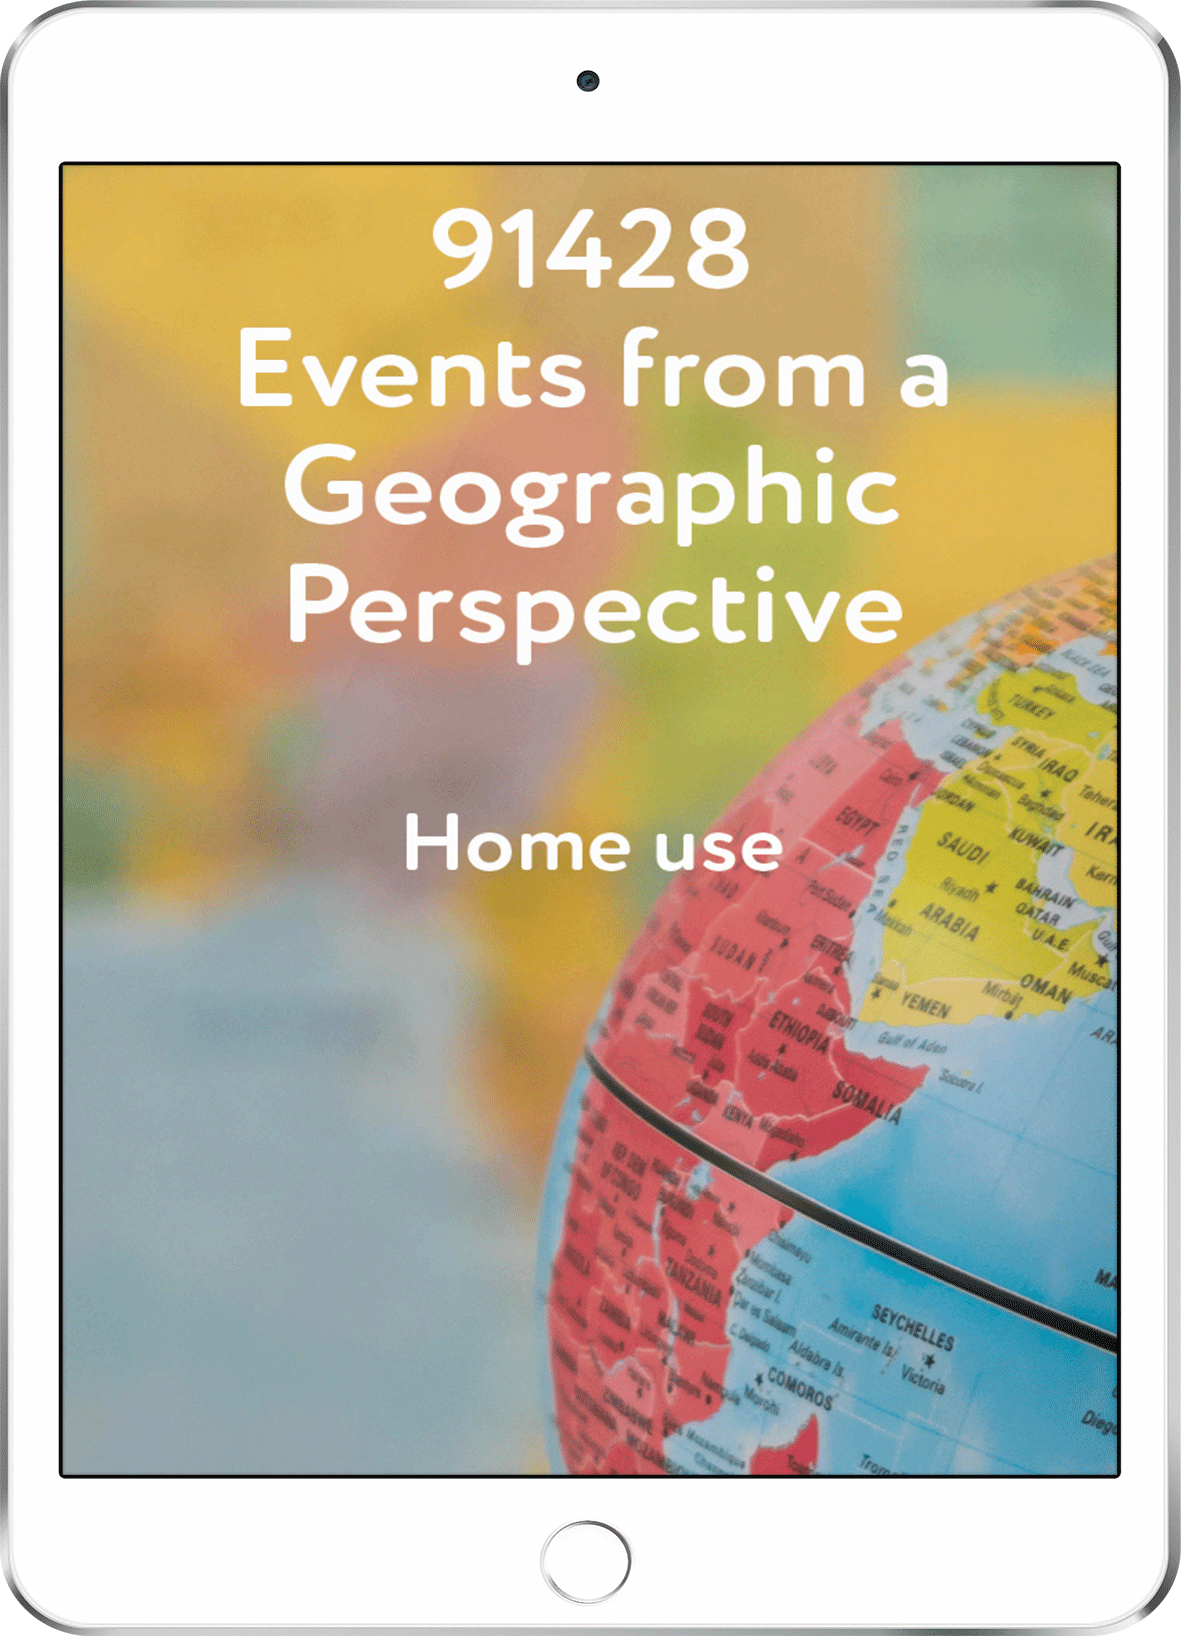 91428 Events from a Geographic Perspective - Home Use